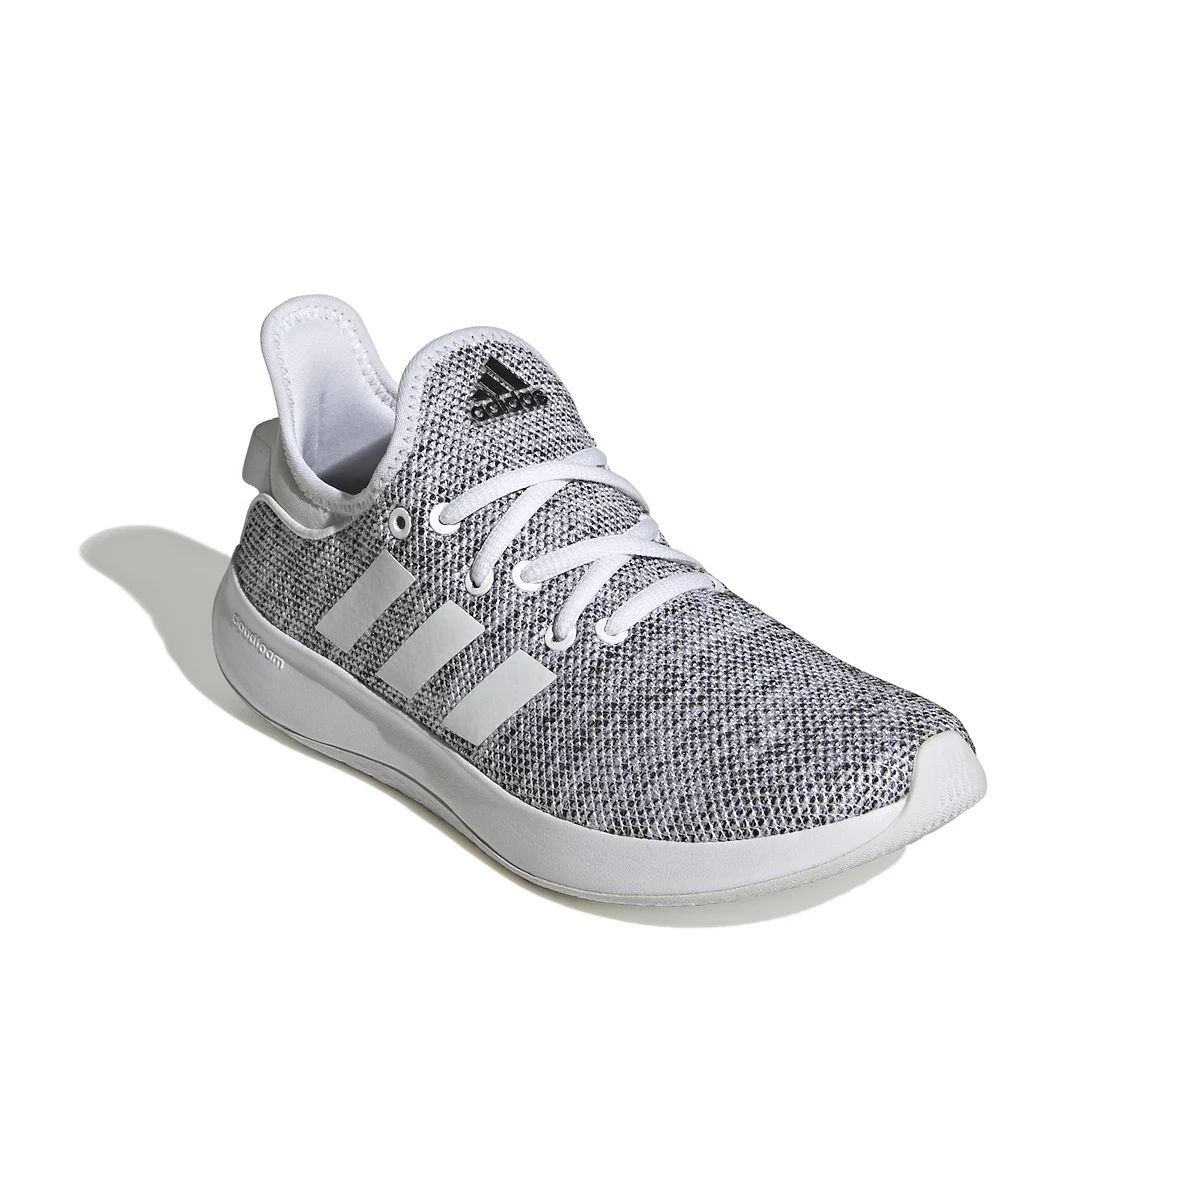 adidas Cloudfoam Pure SPW Women's Lifestyle Running Shoes | Kohl's